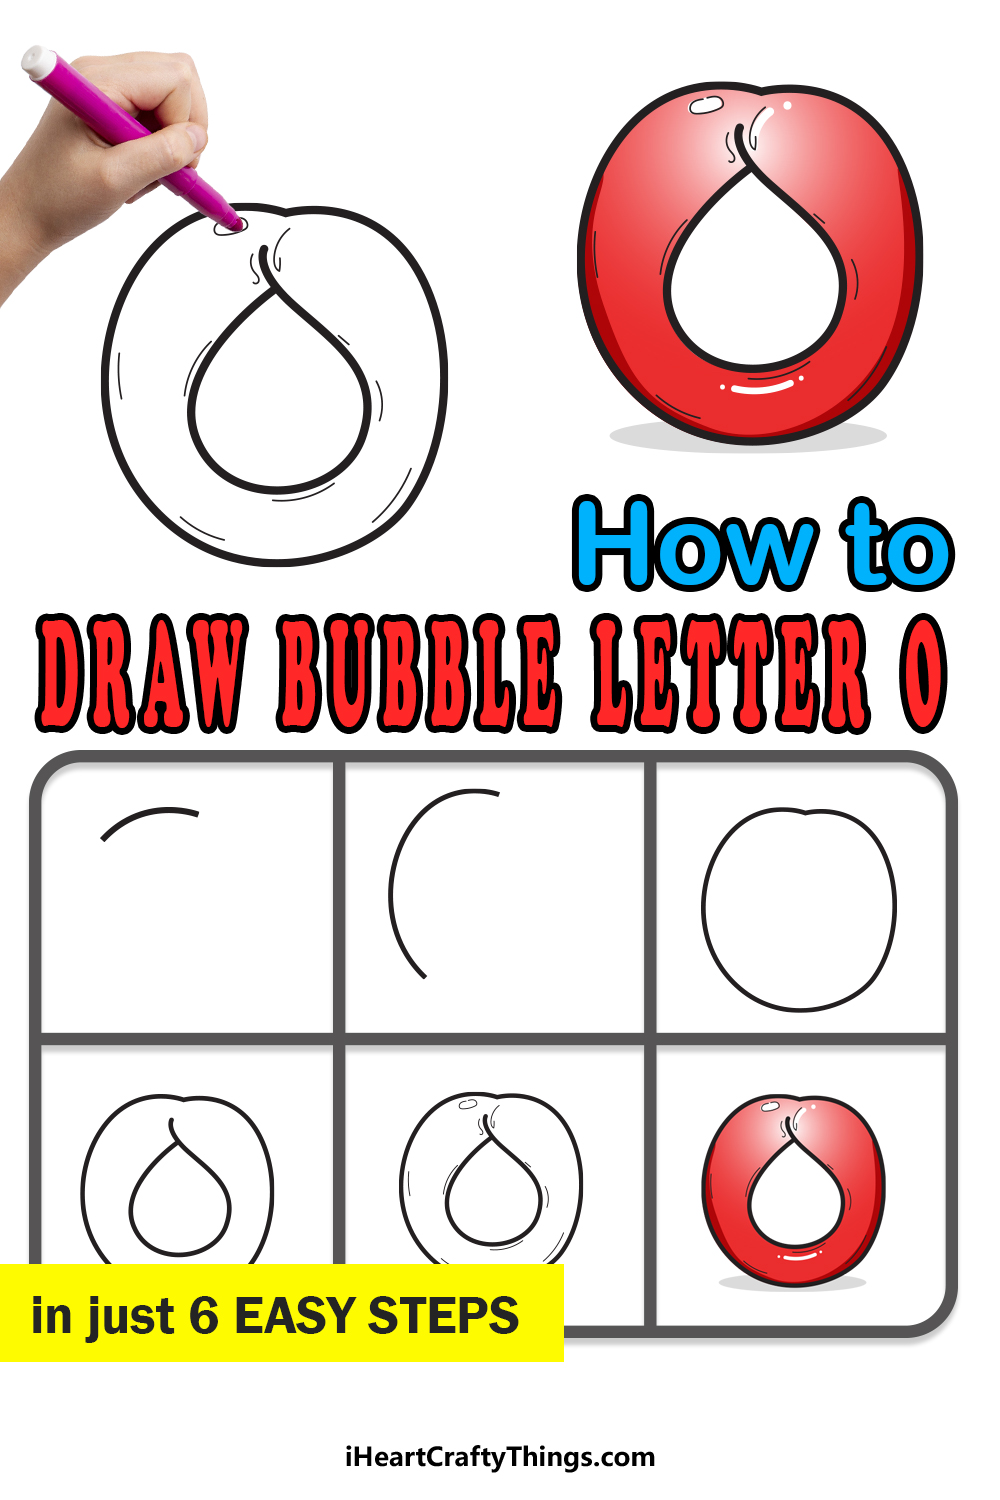 How To Draw Your Own Bubble O step by step guide